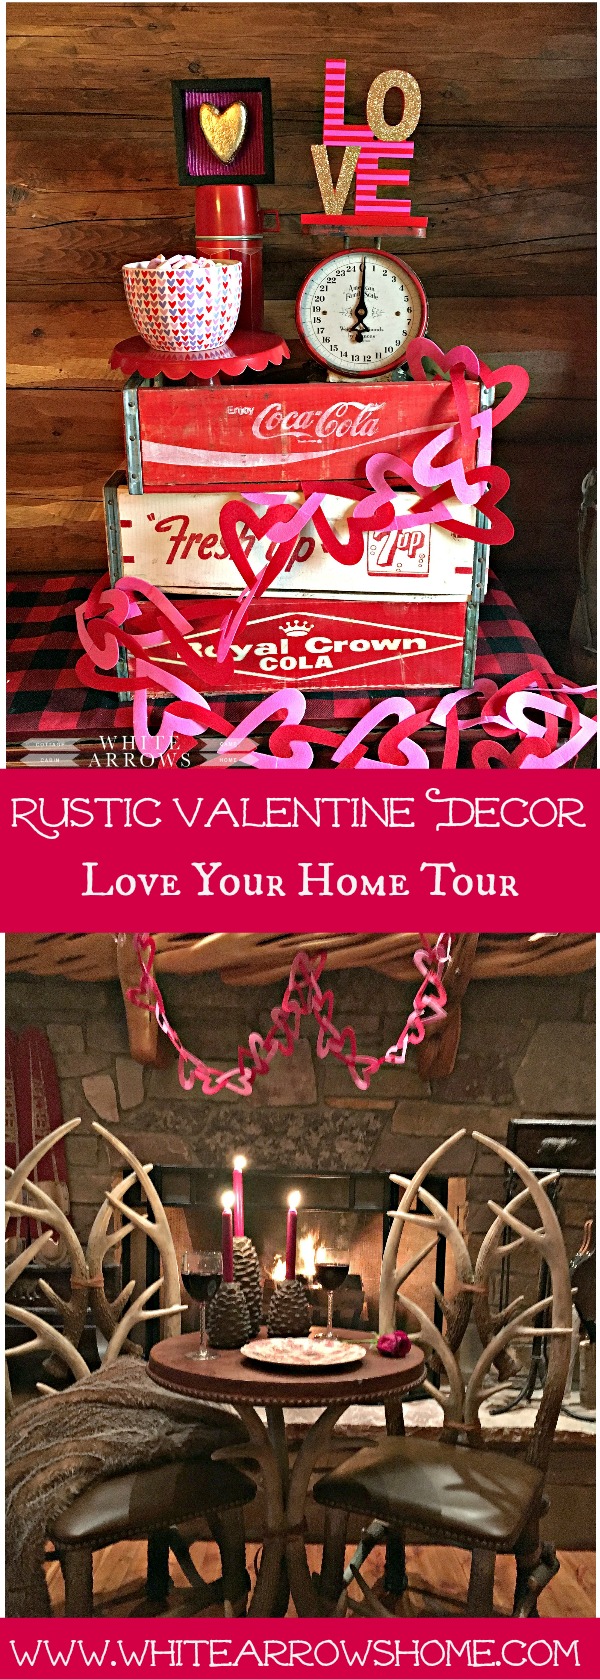 Rustic Valentine's Decor- How We Love Our Homes Tour